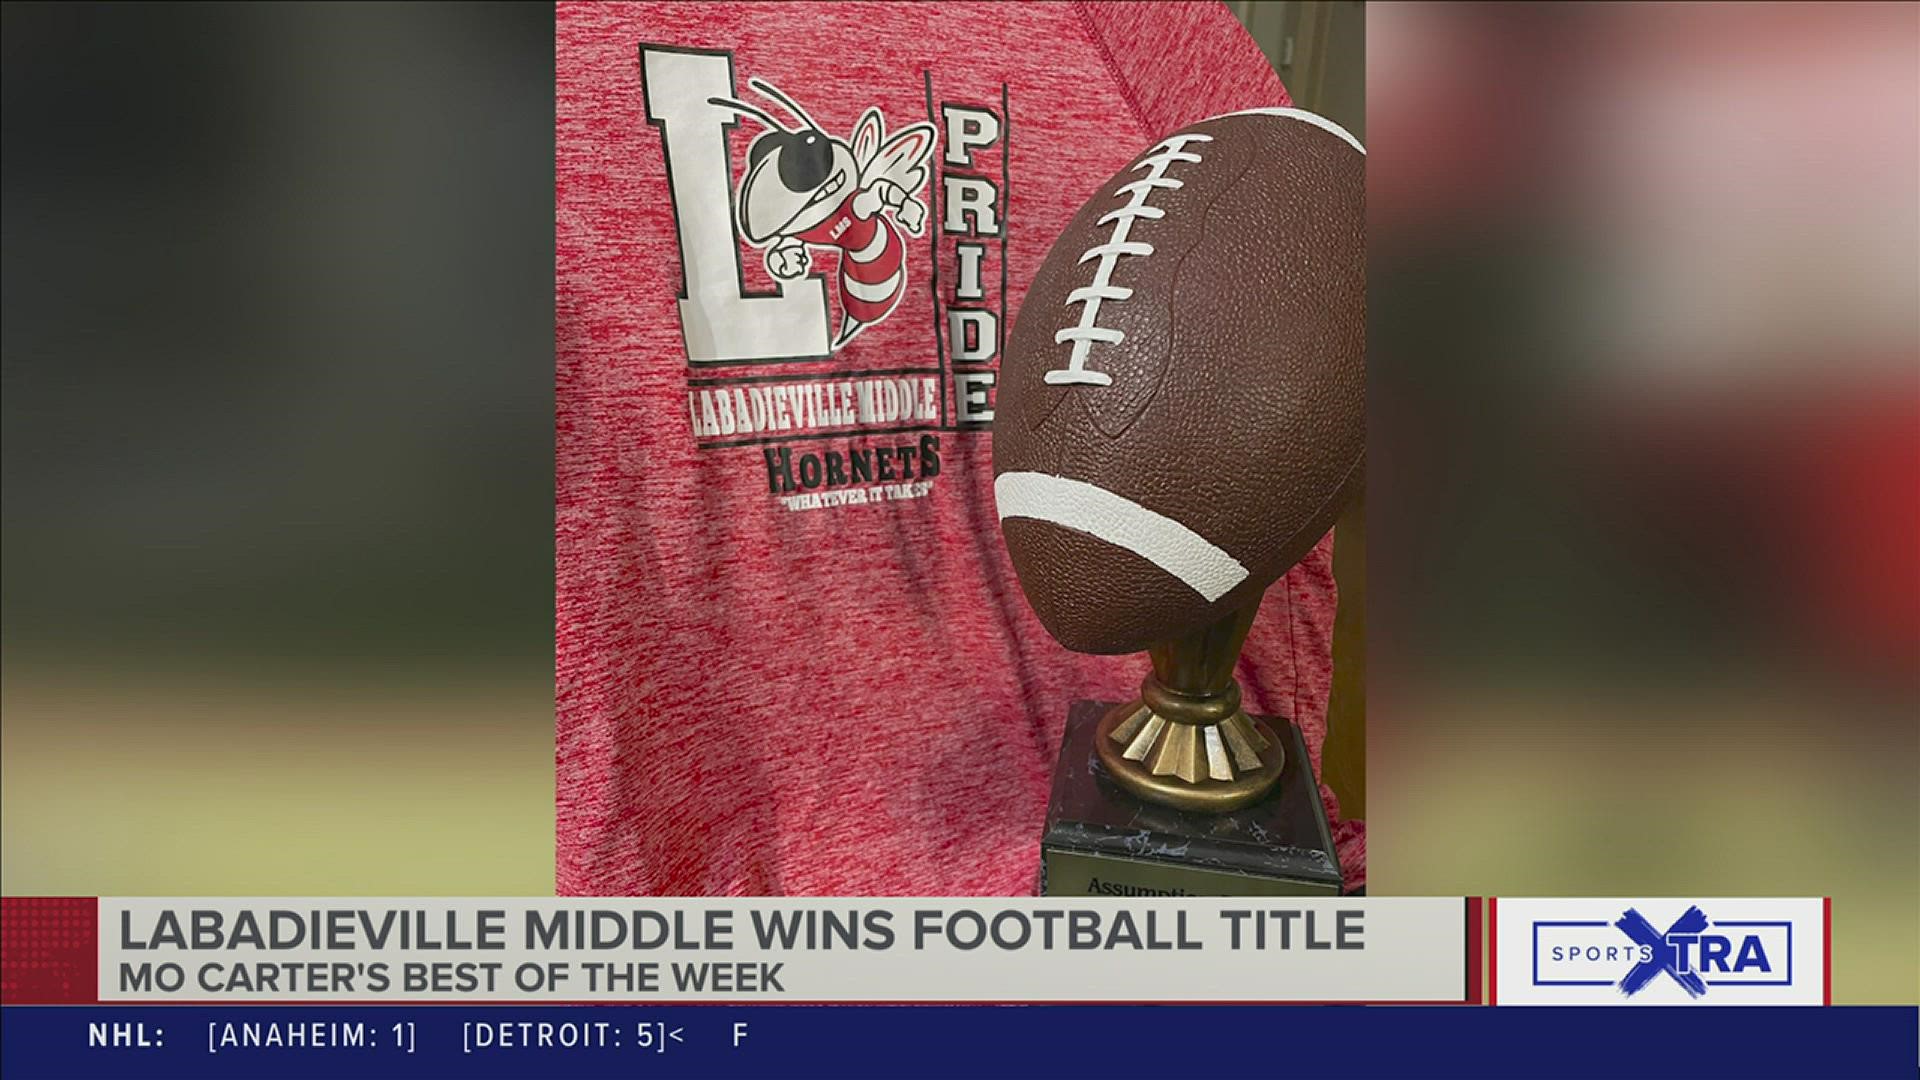 Labadieville Middle School, the alma mater of Mo Carter, won the 2022 Assumption Parish Middle School Football Title. Mo made sure to give them a big shout out.